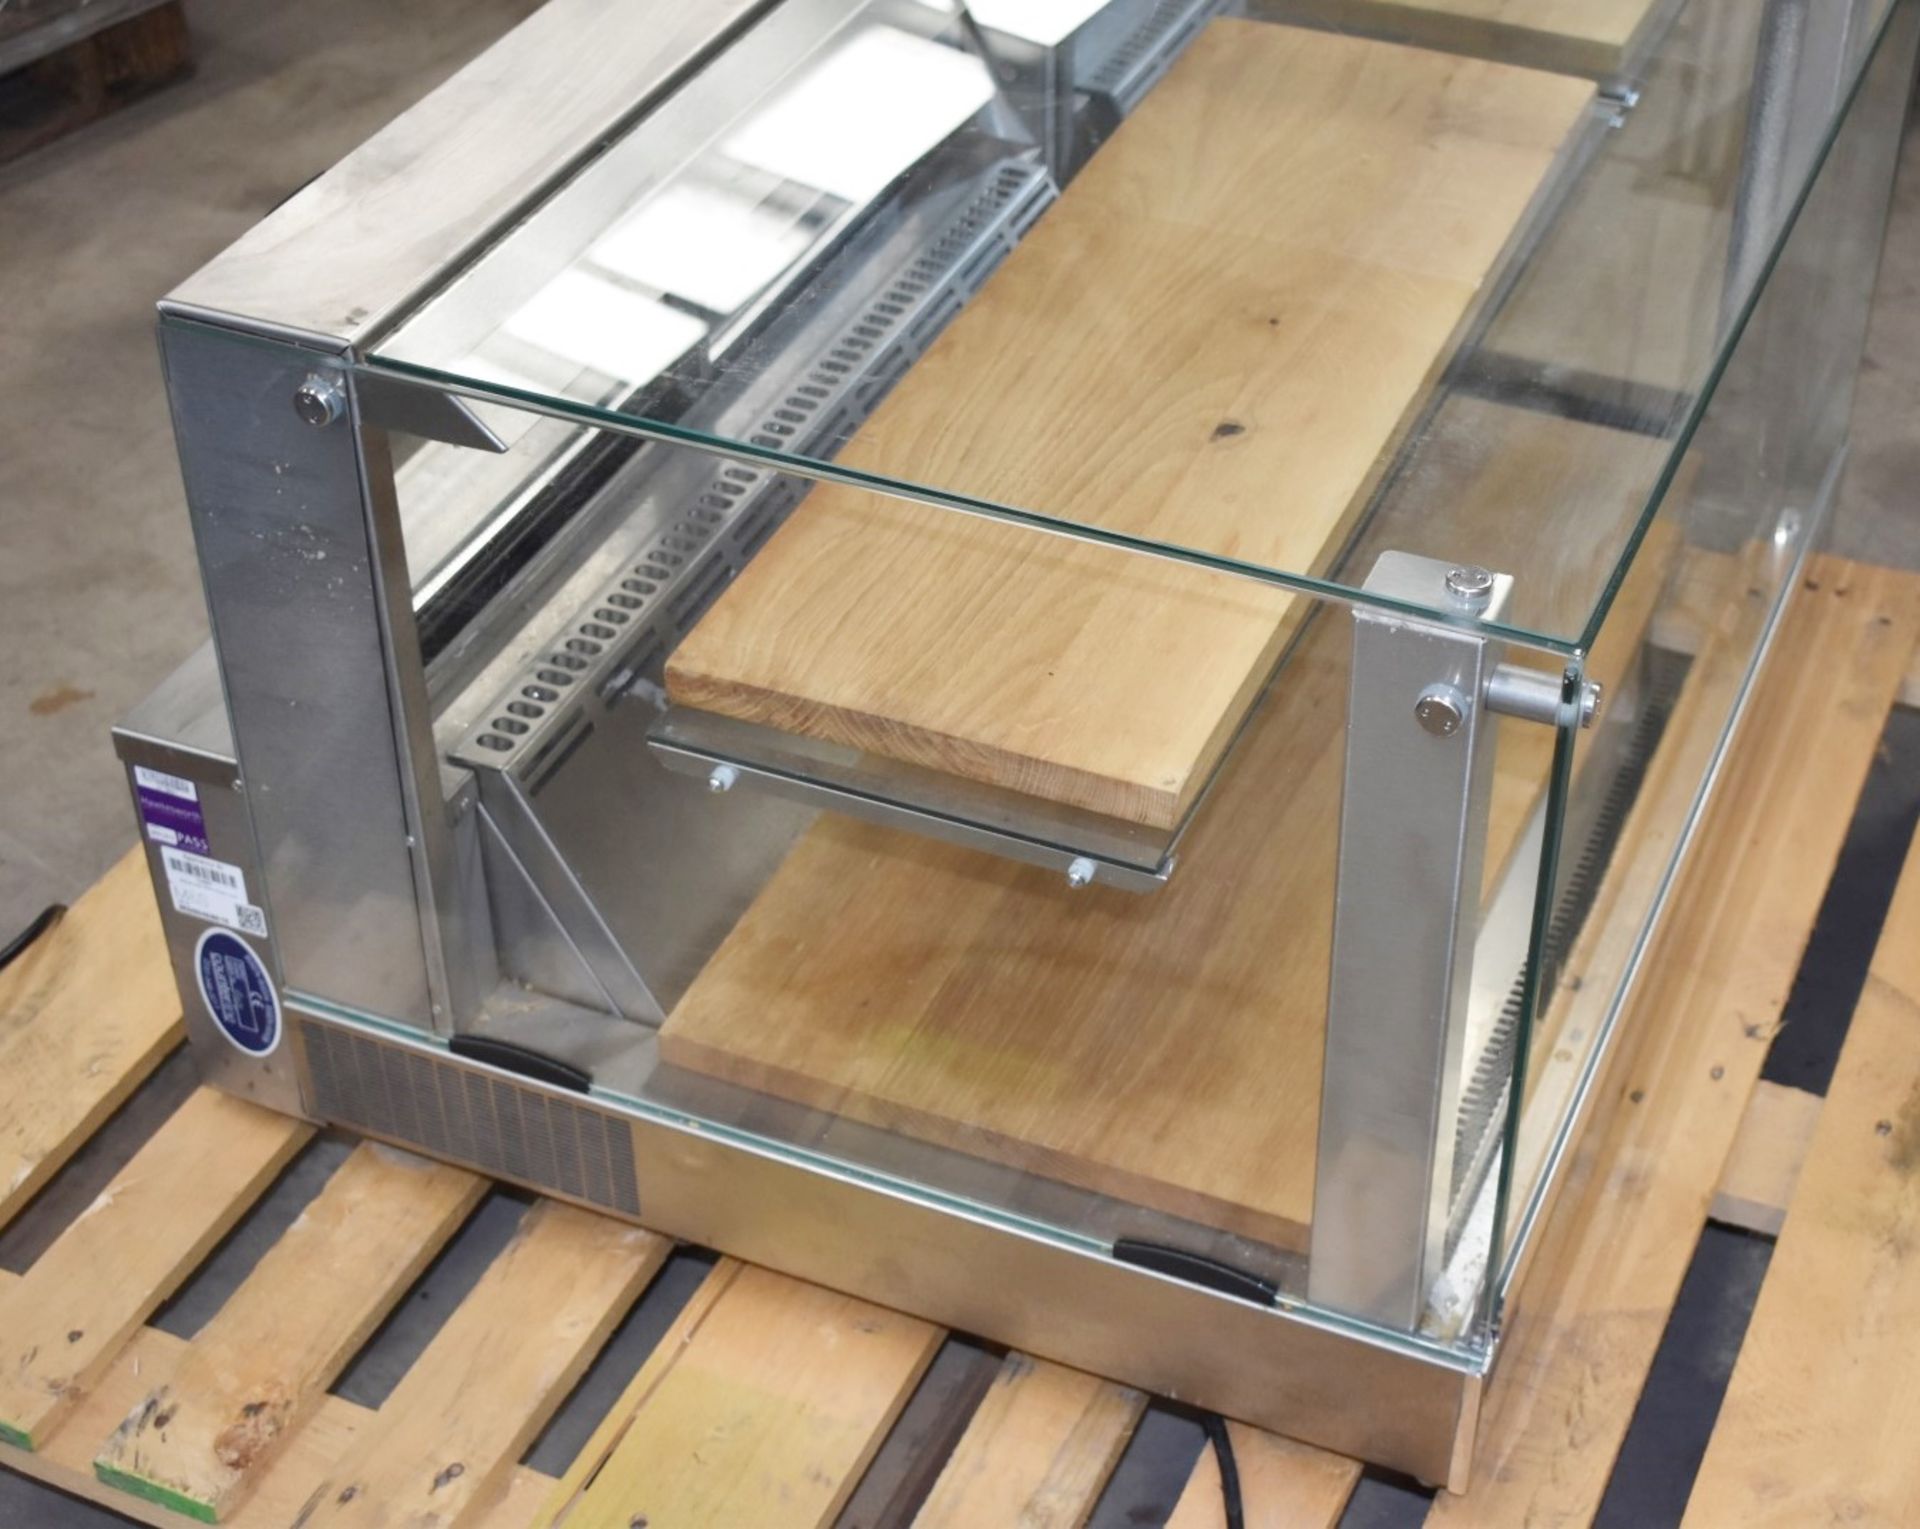 1 x Counterline Chilled Countertop Display Cabinet With Sliding Doors - Ex M&S - Stainless Steel - Image 3 of 9